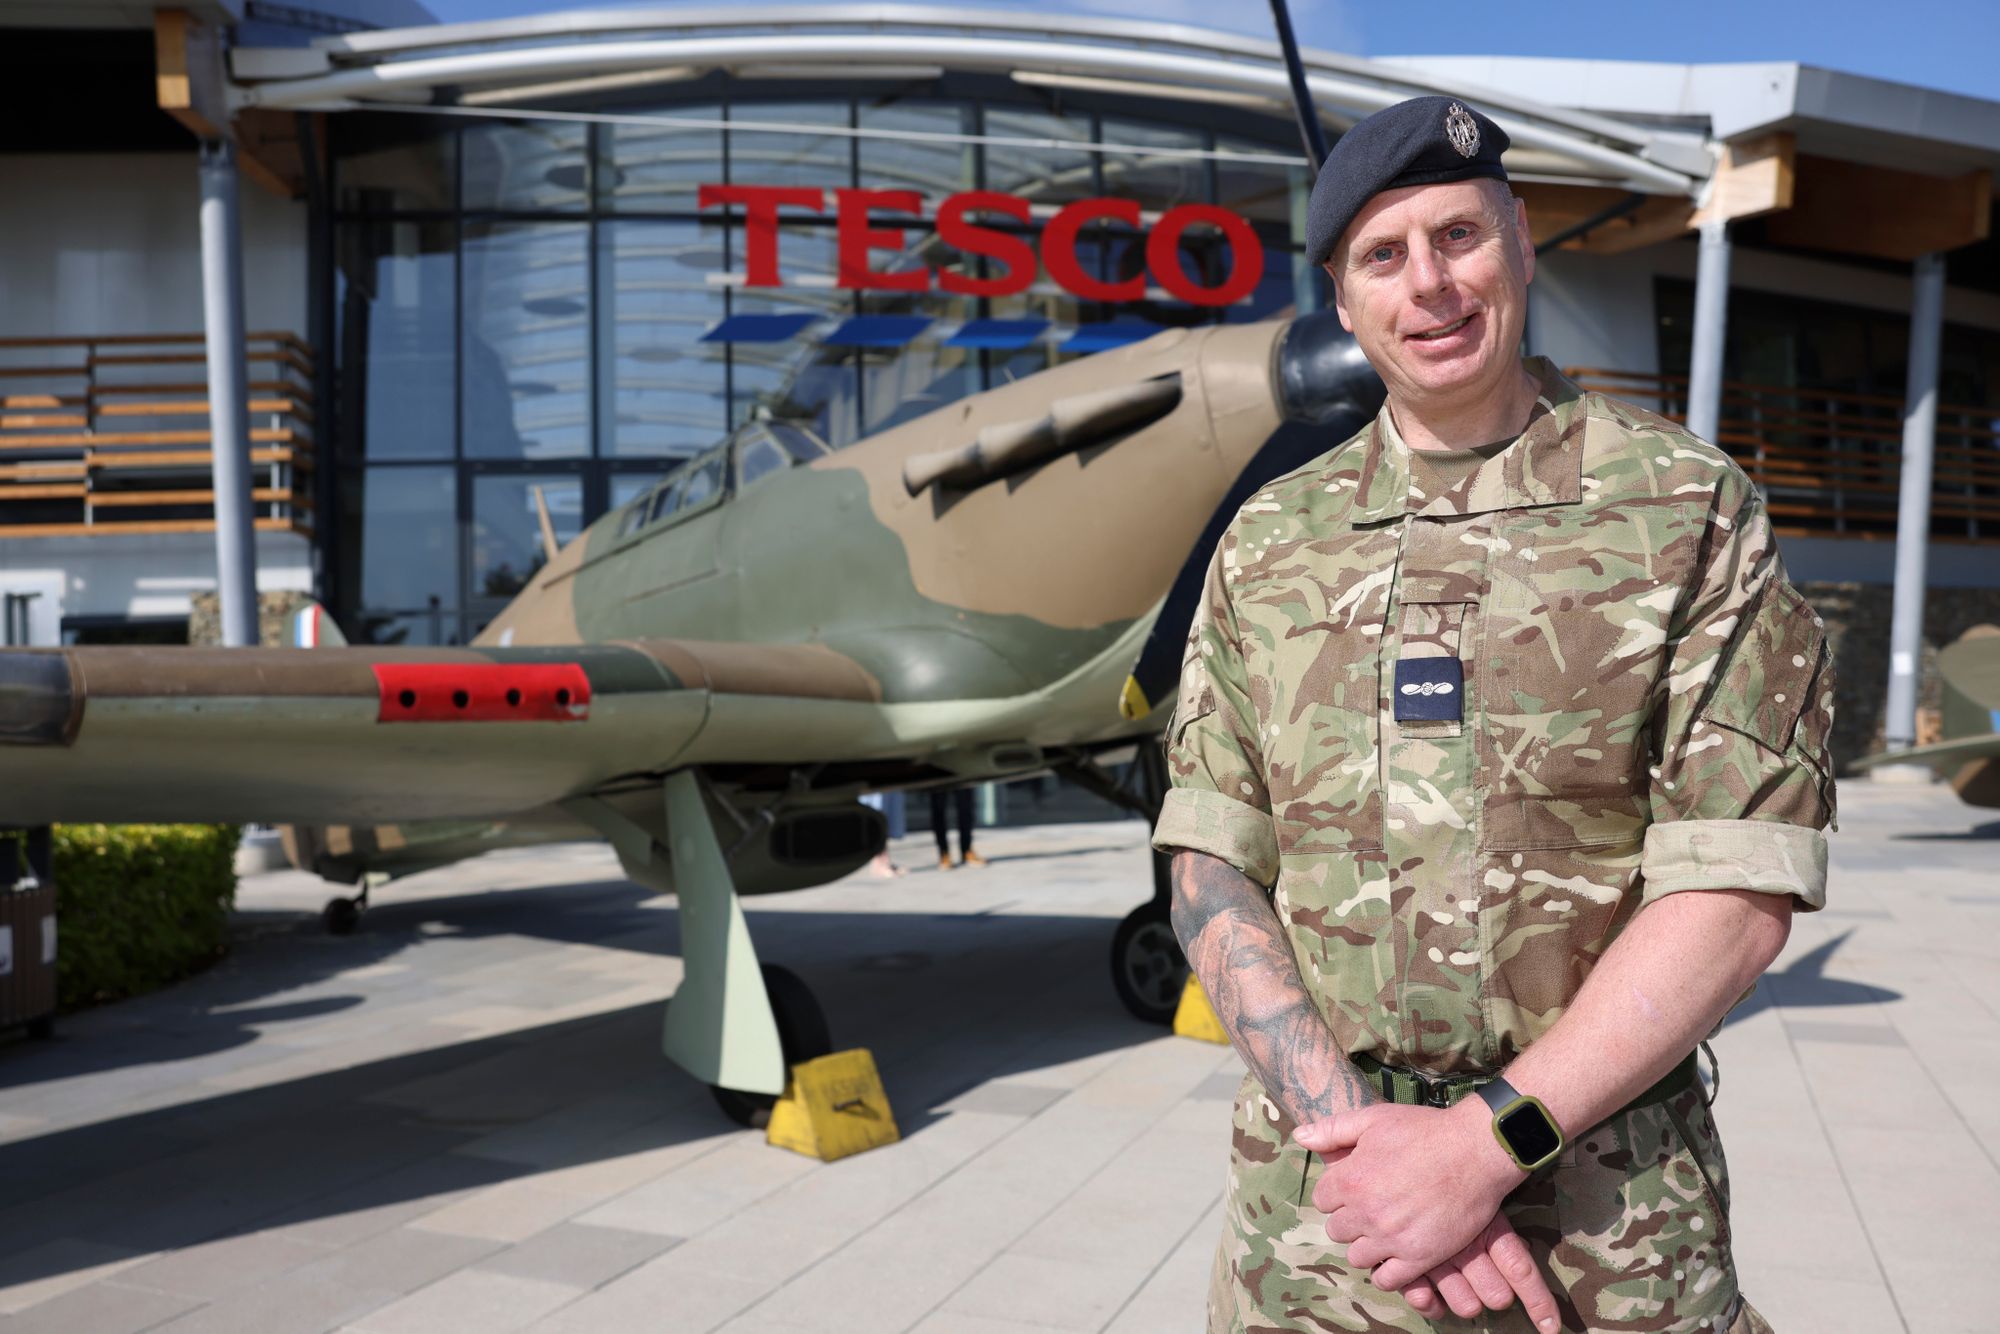 Southport reservist chef Anthony Morris represented the RAF in a national event to celebrate Armed Forces Week and Tescos support of military veterans and reservists